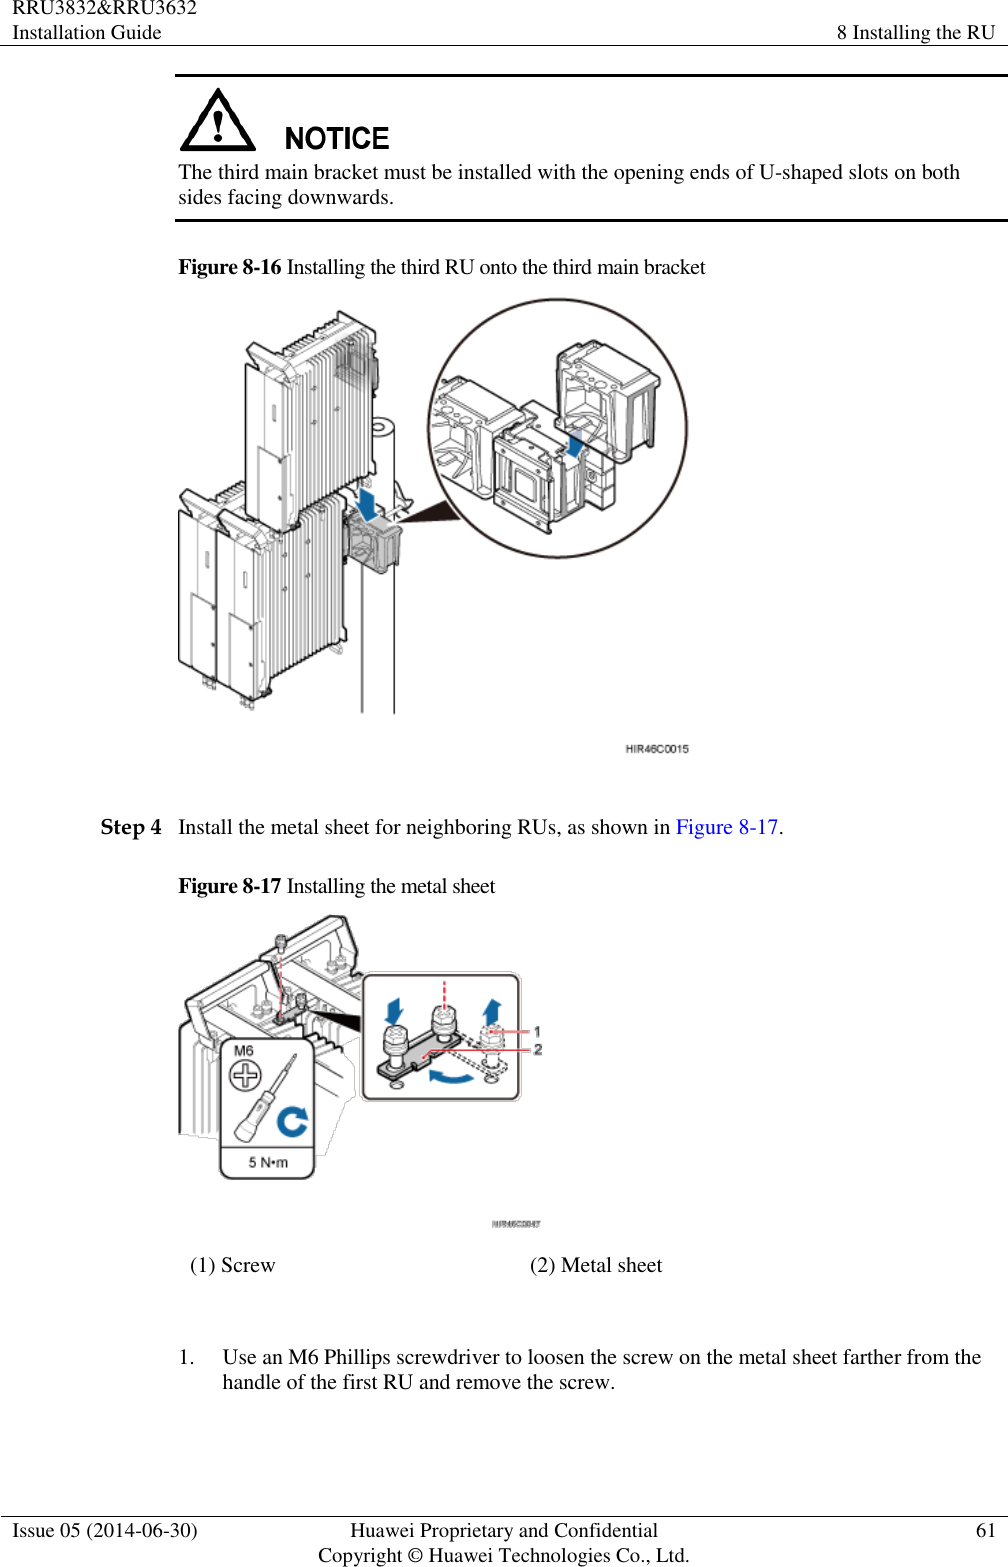 RRU3832&amp;RRU3632 Installation Guide 8 Installing the RU  Issue 05 (2014-06-30) Huawei Proprietary and Confidential                                     Copyright © Huawei Technologies Co., Ltd. 61   The third main bracket must be installed with the opening ends of U-shaped slots on both sides facing downwards. Figure 8-16 Installing the third RU onto the third main bracket   Step 4 Install the metal sheet for neighboring RUs, as shown in Figure 8-17. Figure 8-17 Installing the metal sheet  (1) Screw (2) Metal sheet  1. Use an M6 Phillips screwdriver to loosen the screw on the metal sheet farther from the handle of the first RU and remove the screw. 